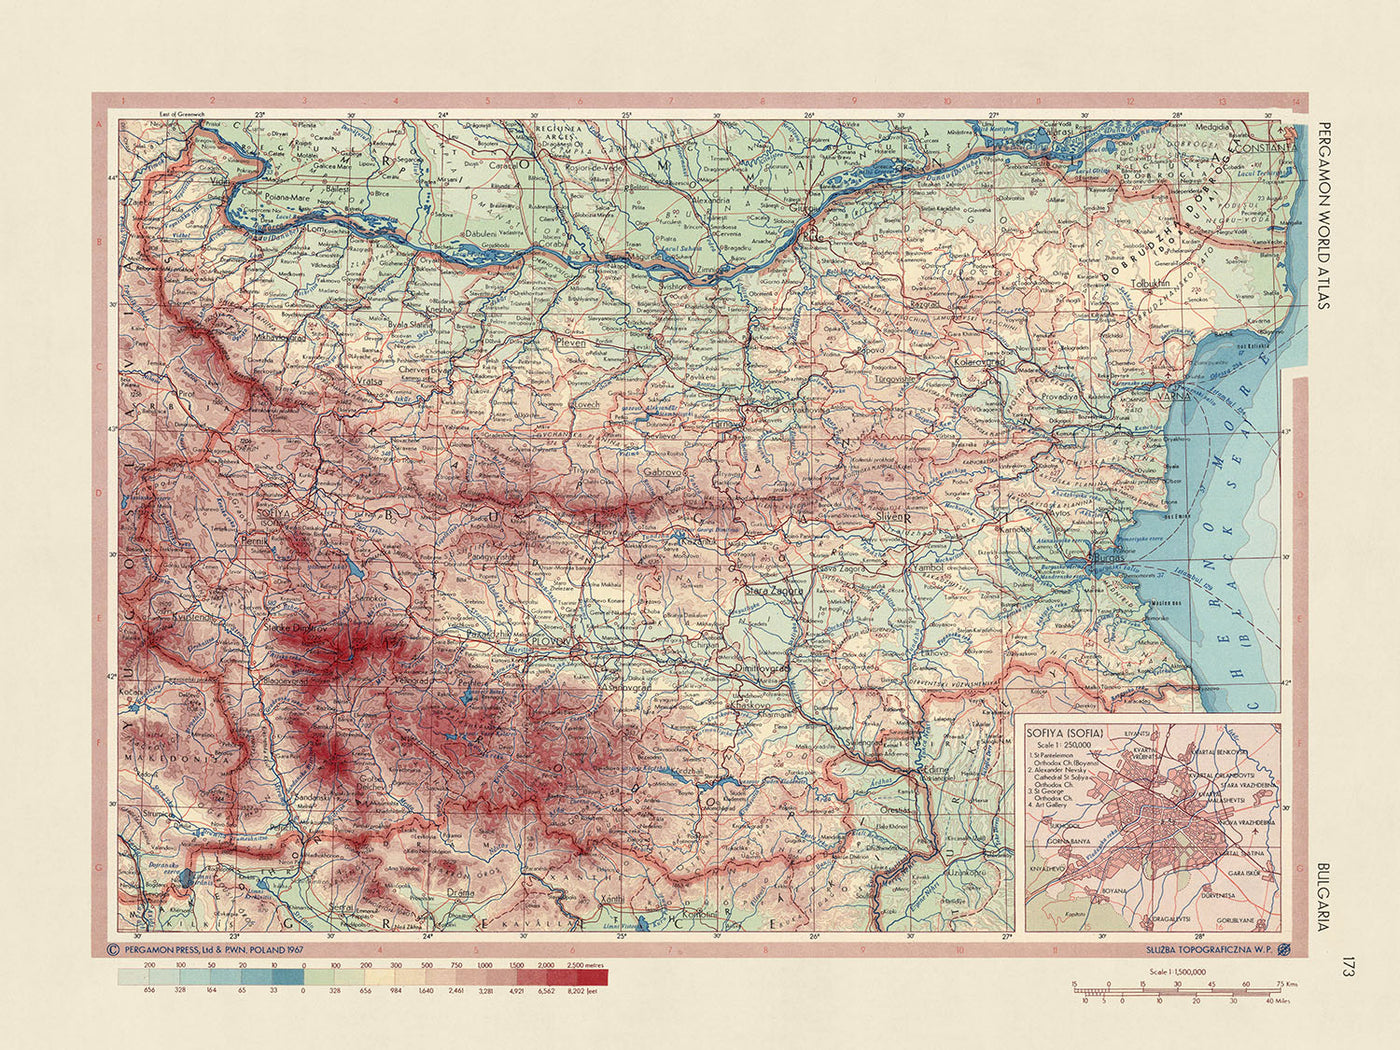 Old Map of Bulgaria, 1967: Sofia, Detailed Political and Physical Representation, Mountains, Rivers, and Plains